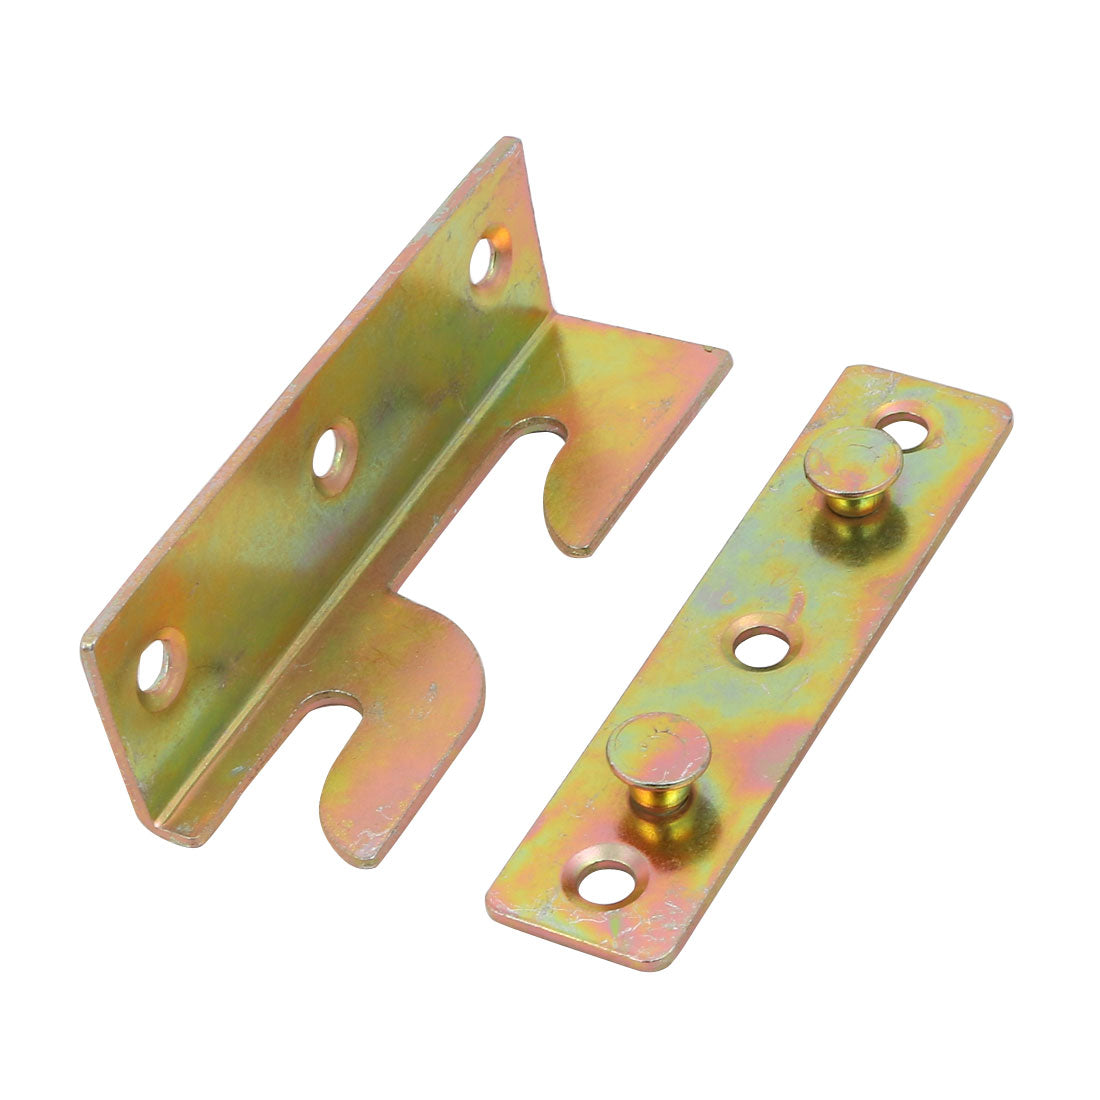 uxcell Uxcell 79mmx25mmx23mm Screw Fixed Bed Hinge Rail Brackets Connecting Fittings 4 Sets